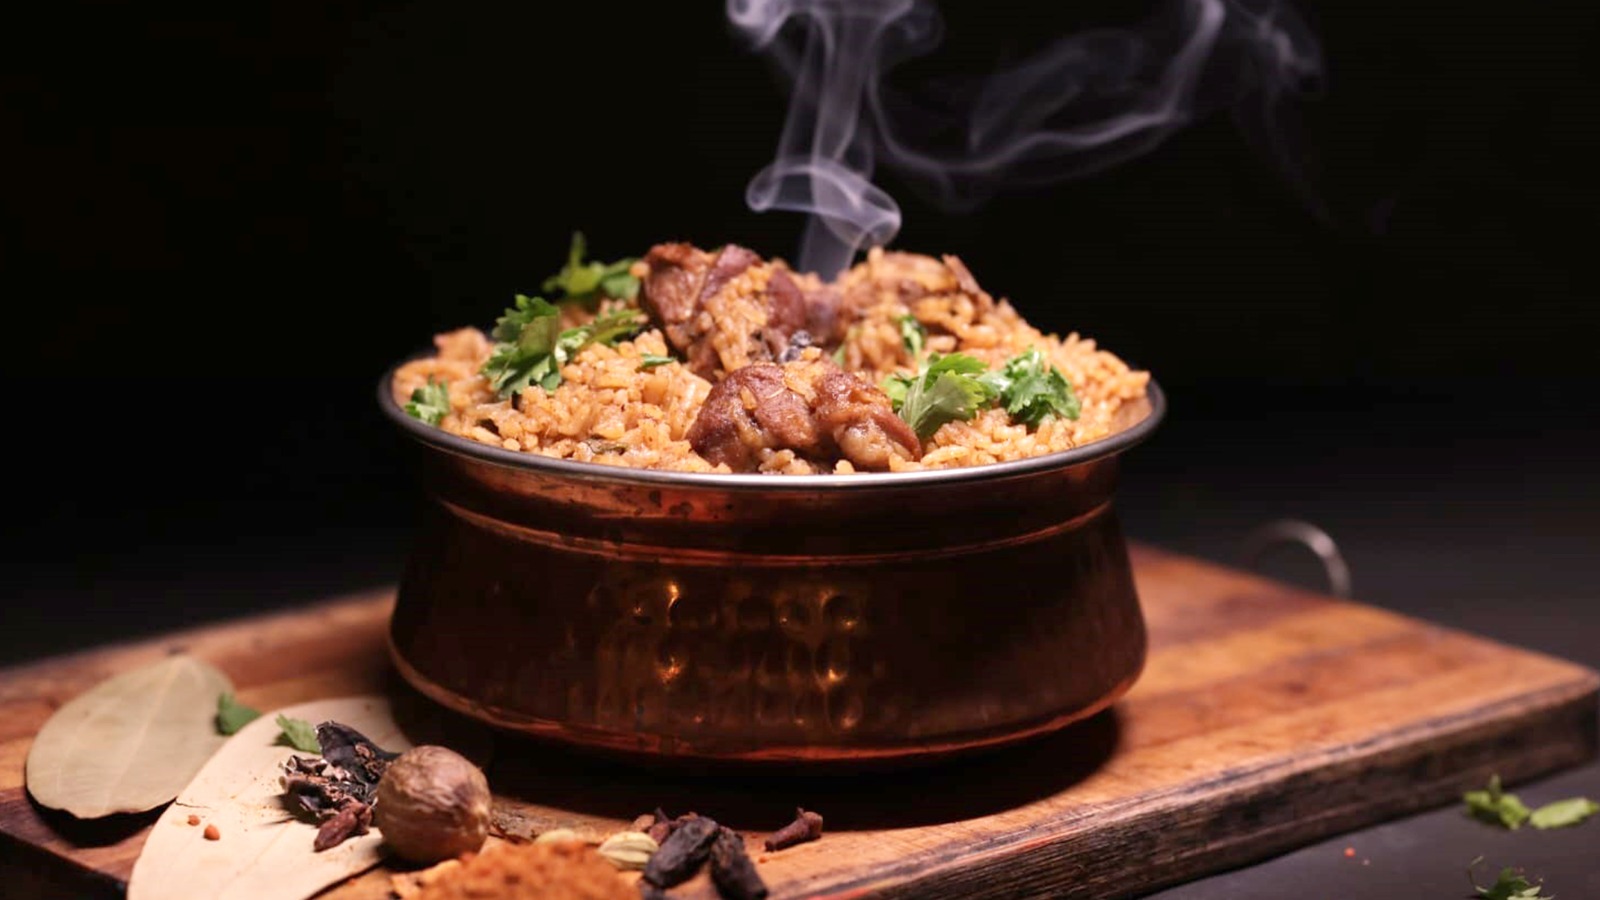 A bowl of Kongu Mutton Biryani placed on a wooden board with a few spices